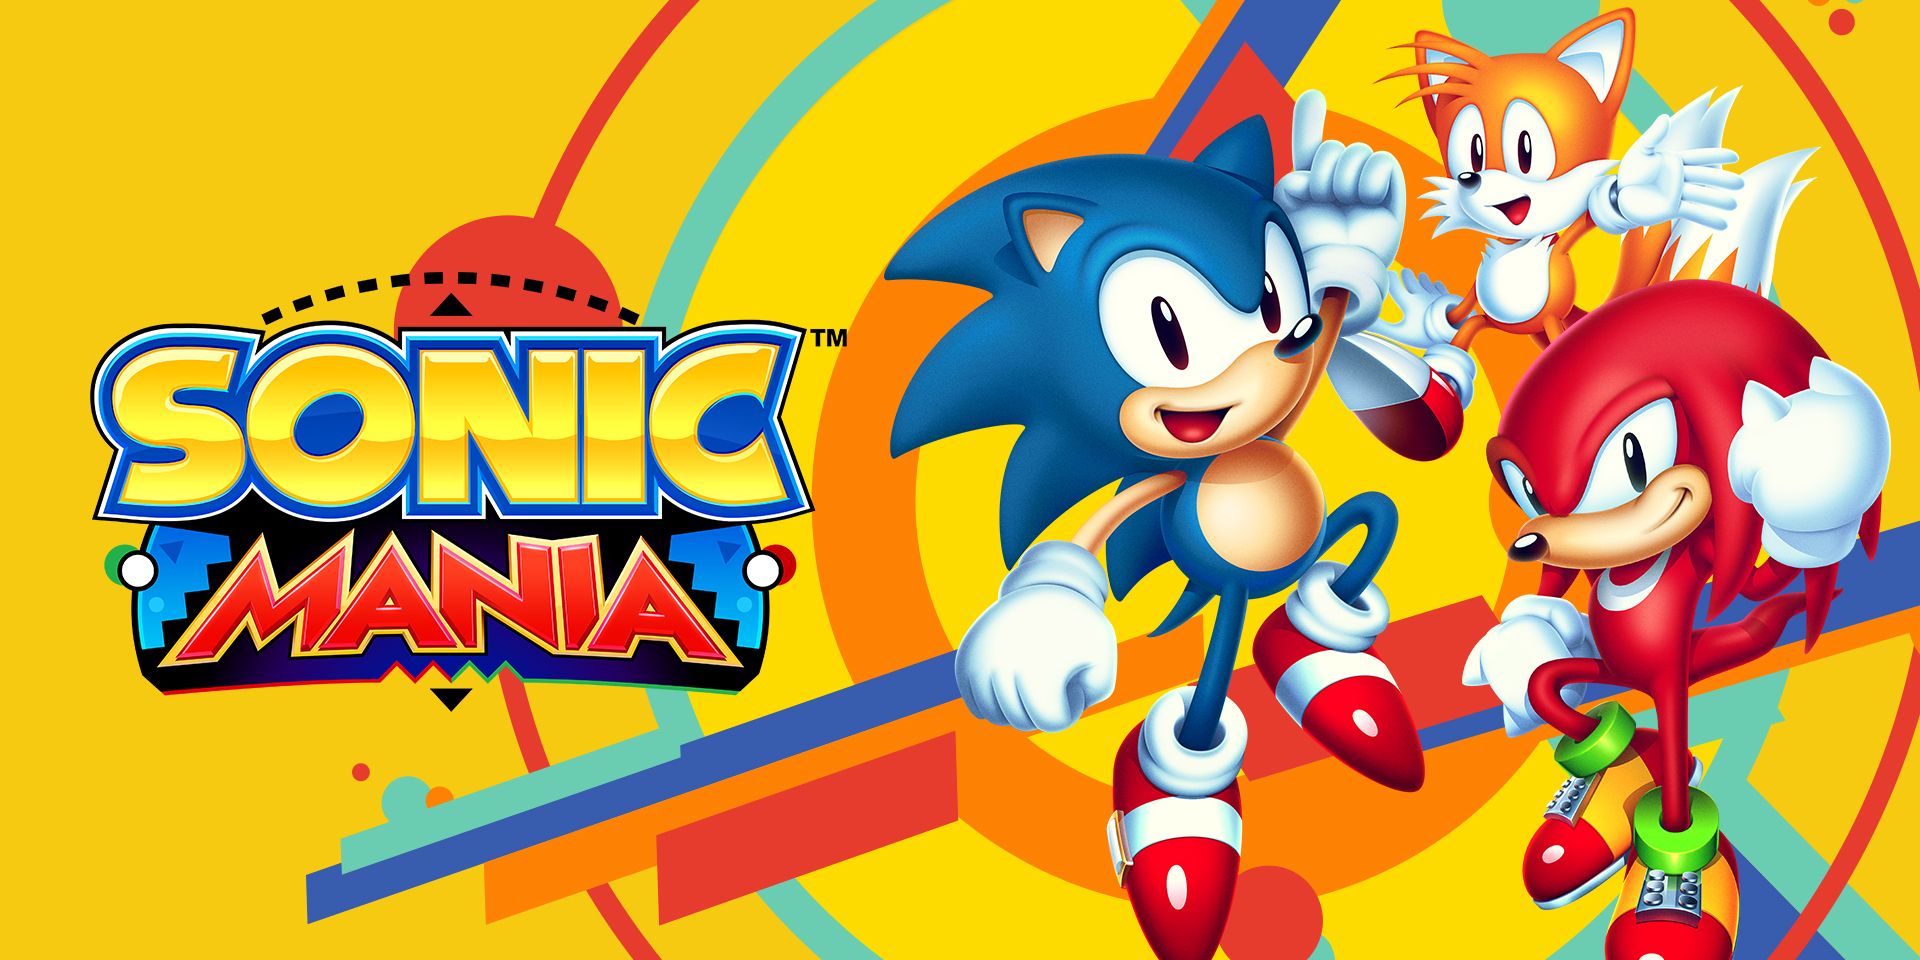 Sonic, Tails and Knuckles with the Sonic Mania logo to the left